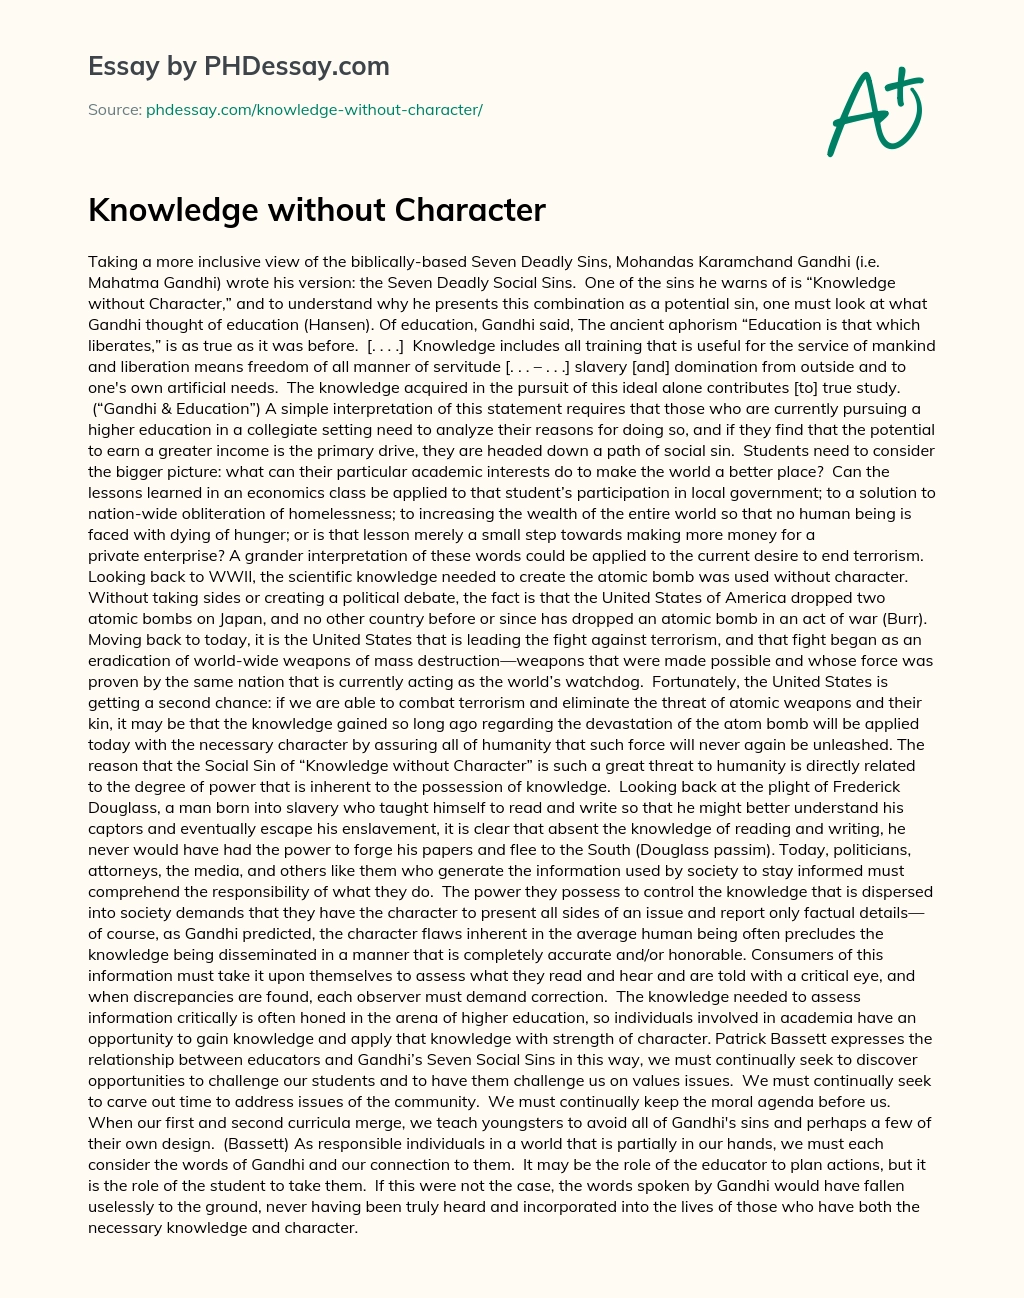 knowledge without character essay